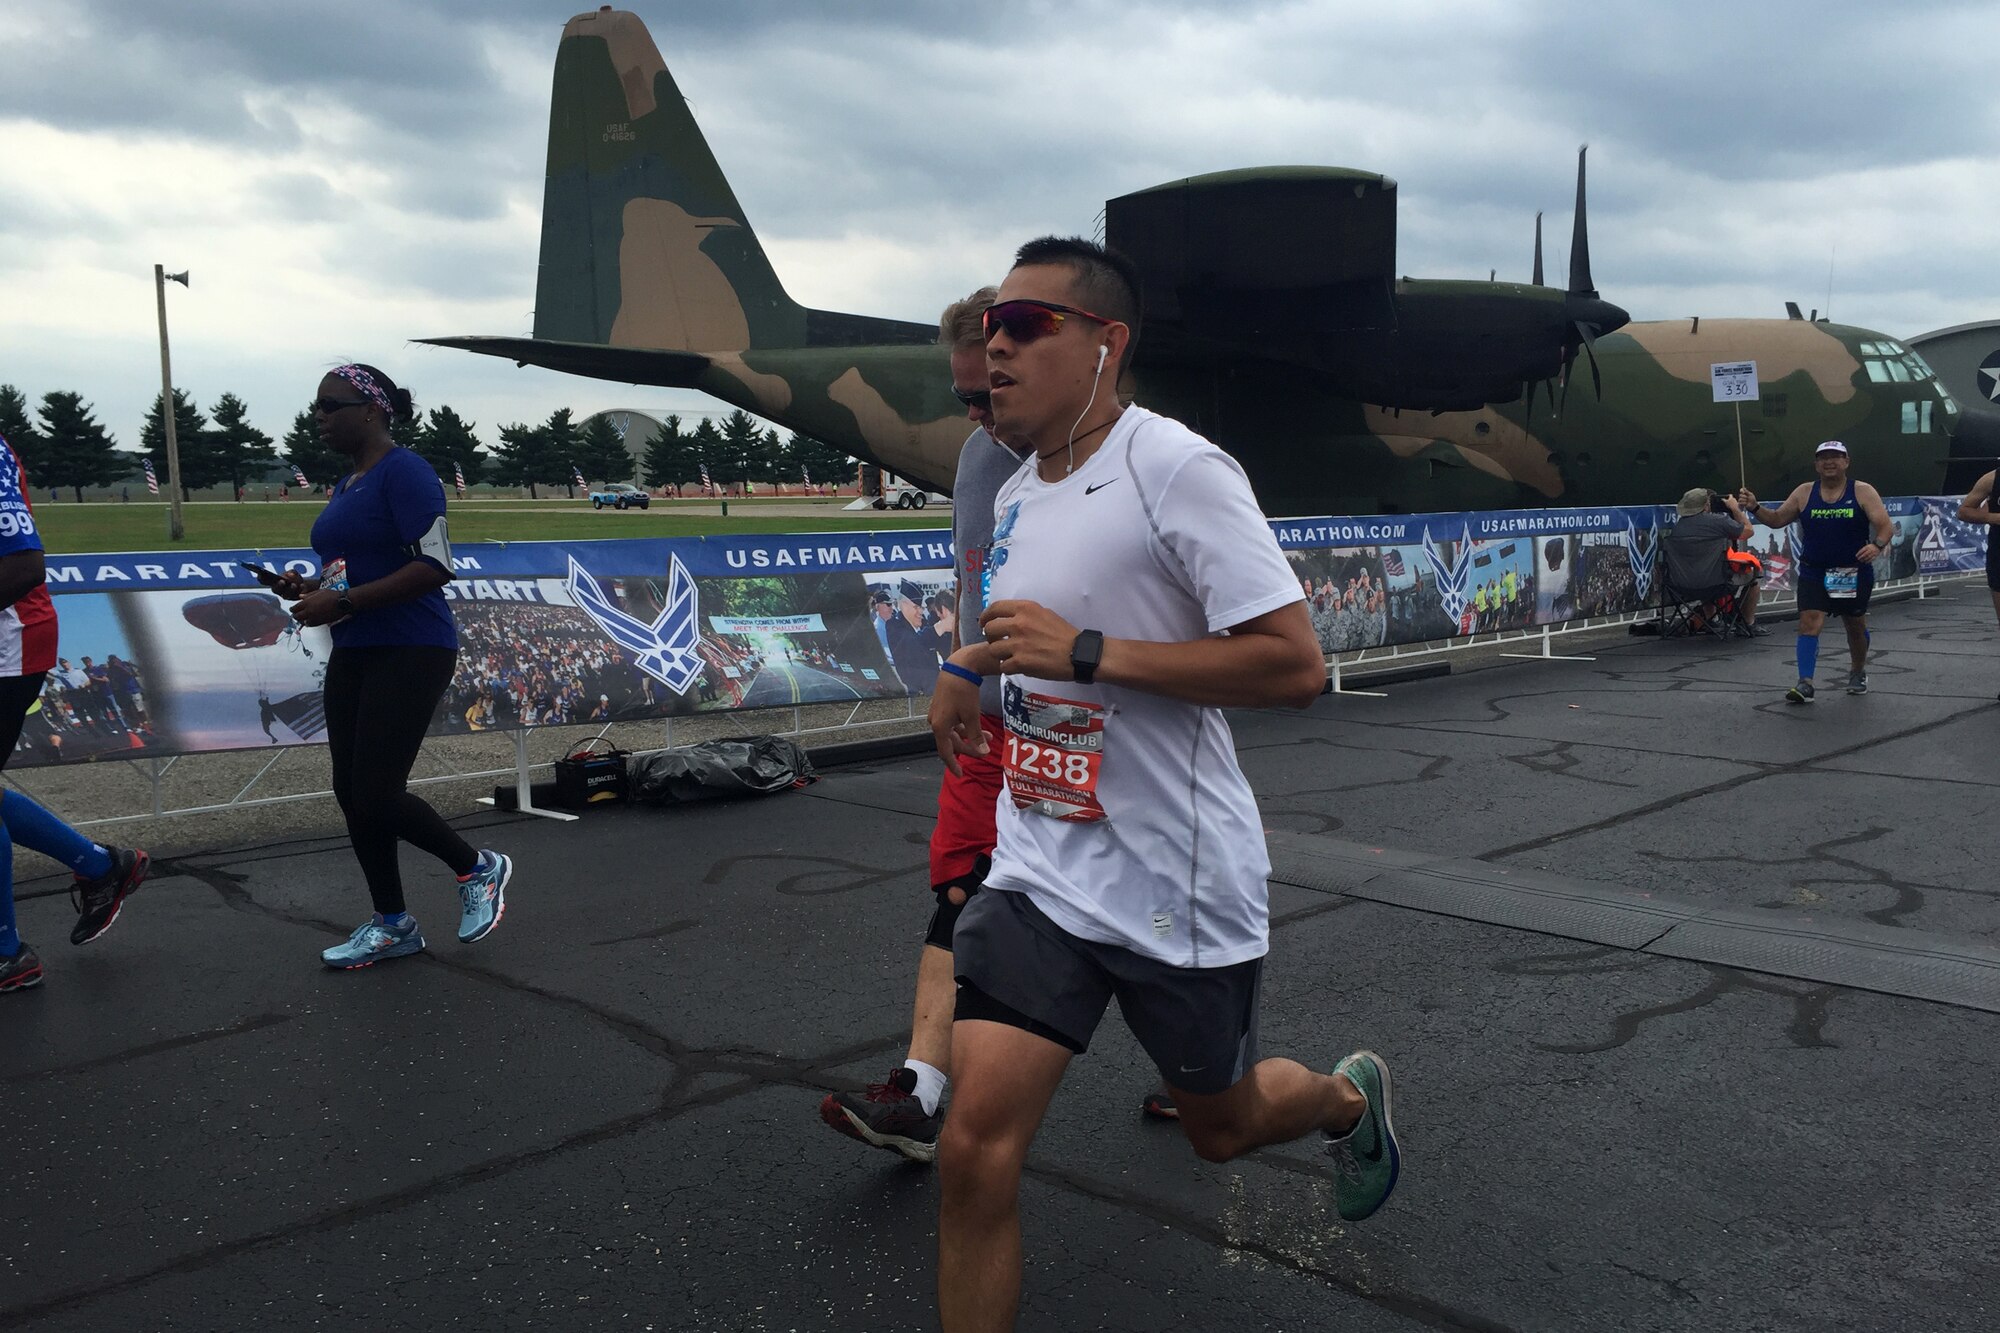 Tech. Sgt. Randal Hernandez, 81st Training Wing command chief executive, runs in the annual Air Force Marathon, Sept. 17, 2016, on Wright-Patterson Air Force Base, Ohio. Eight Keesler members travelled to Ohio to participate in the marathon's 20th anniversary and compete in its 26.2 mile race. (Courtesy photo)